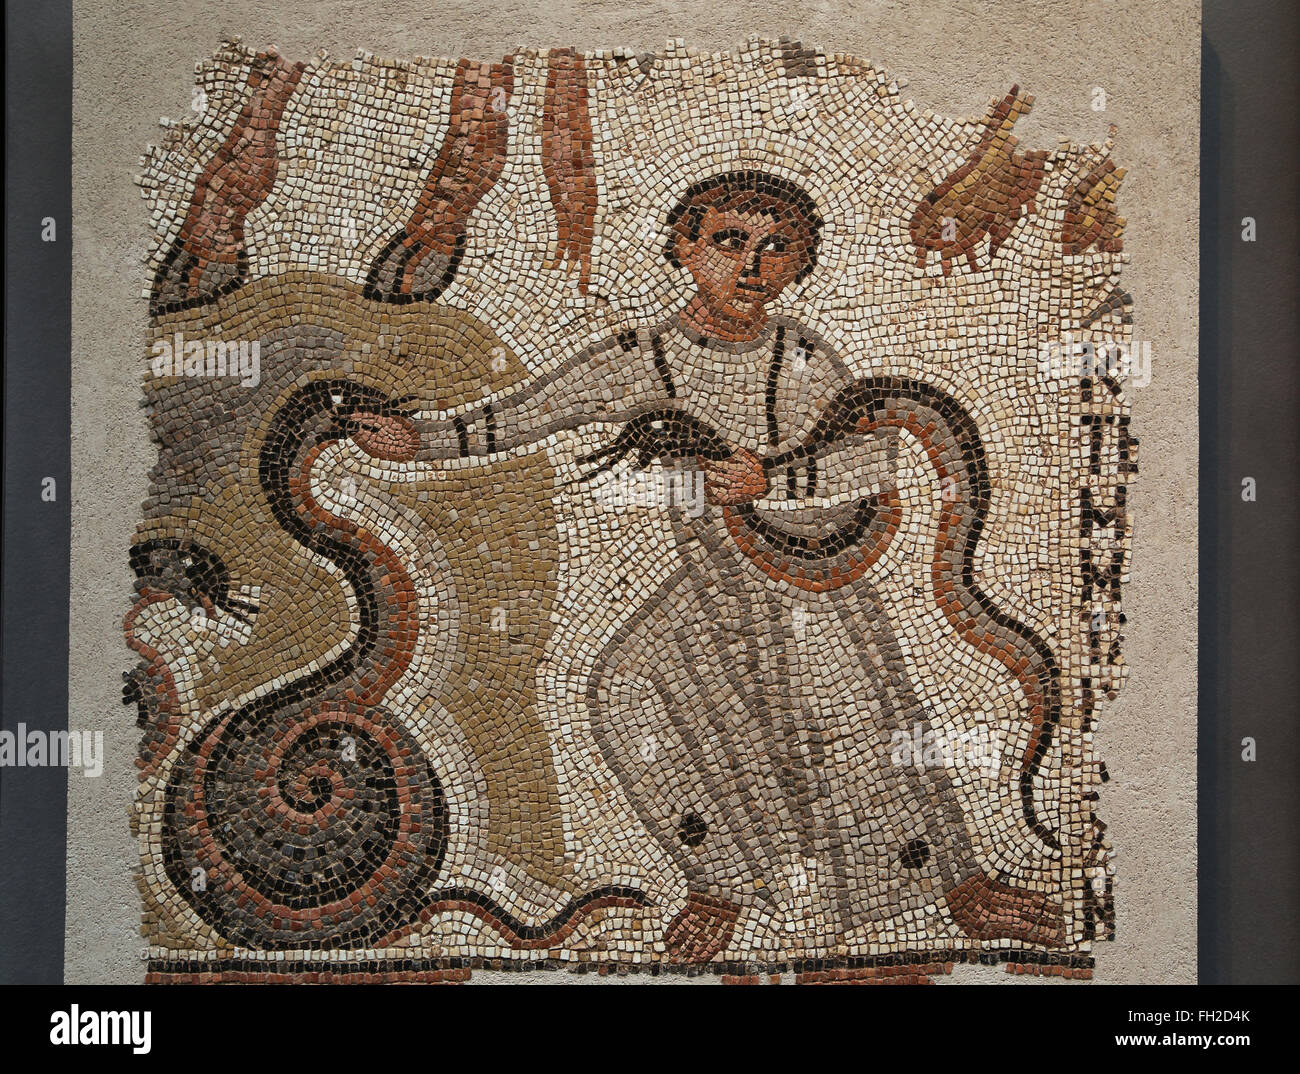 Roman mosaic. Young boy playing with snakes. Early Christian. Syria or Lebanon, 5th century AD. Book of Isai. Stock Photo